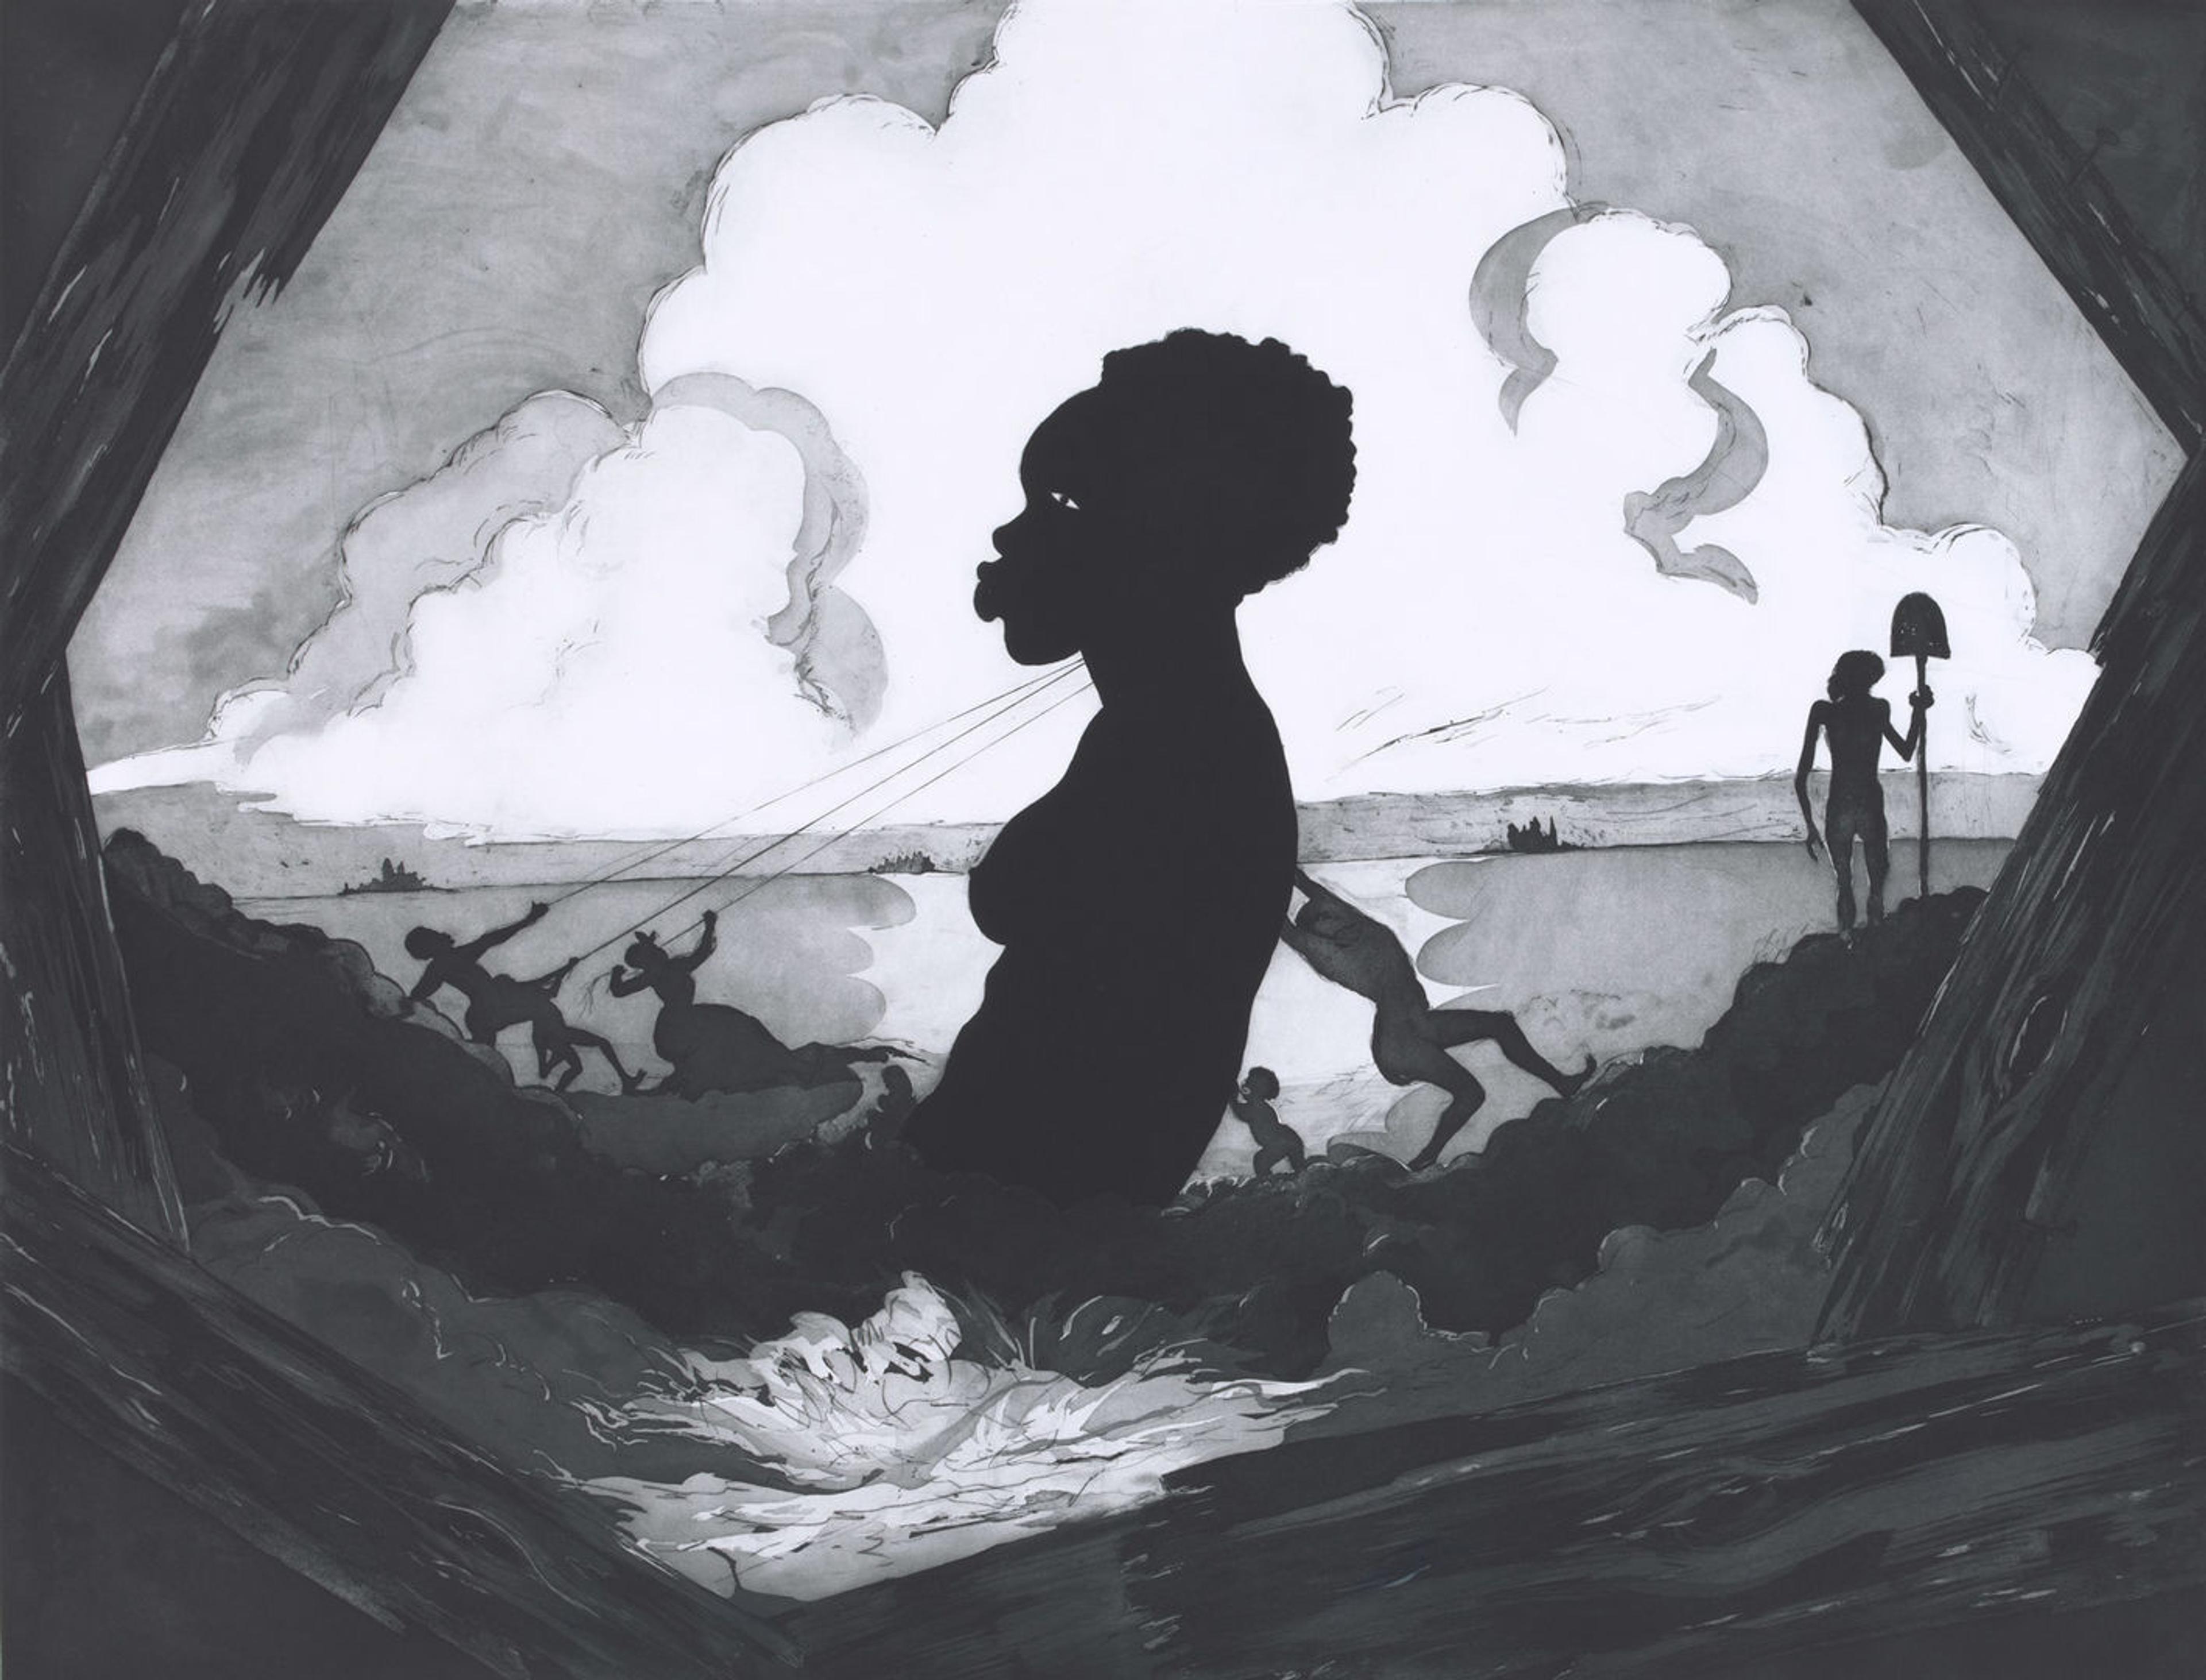 Center panel of a paper triptych by Kara Walker showing the erection of a large statue of a woman